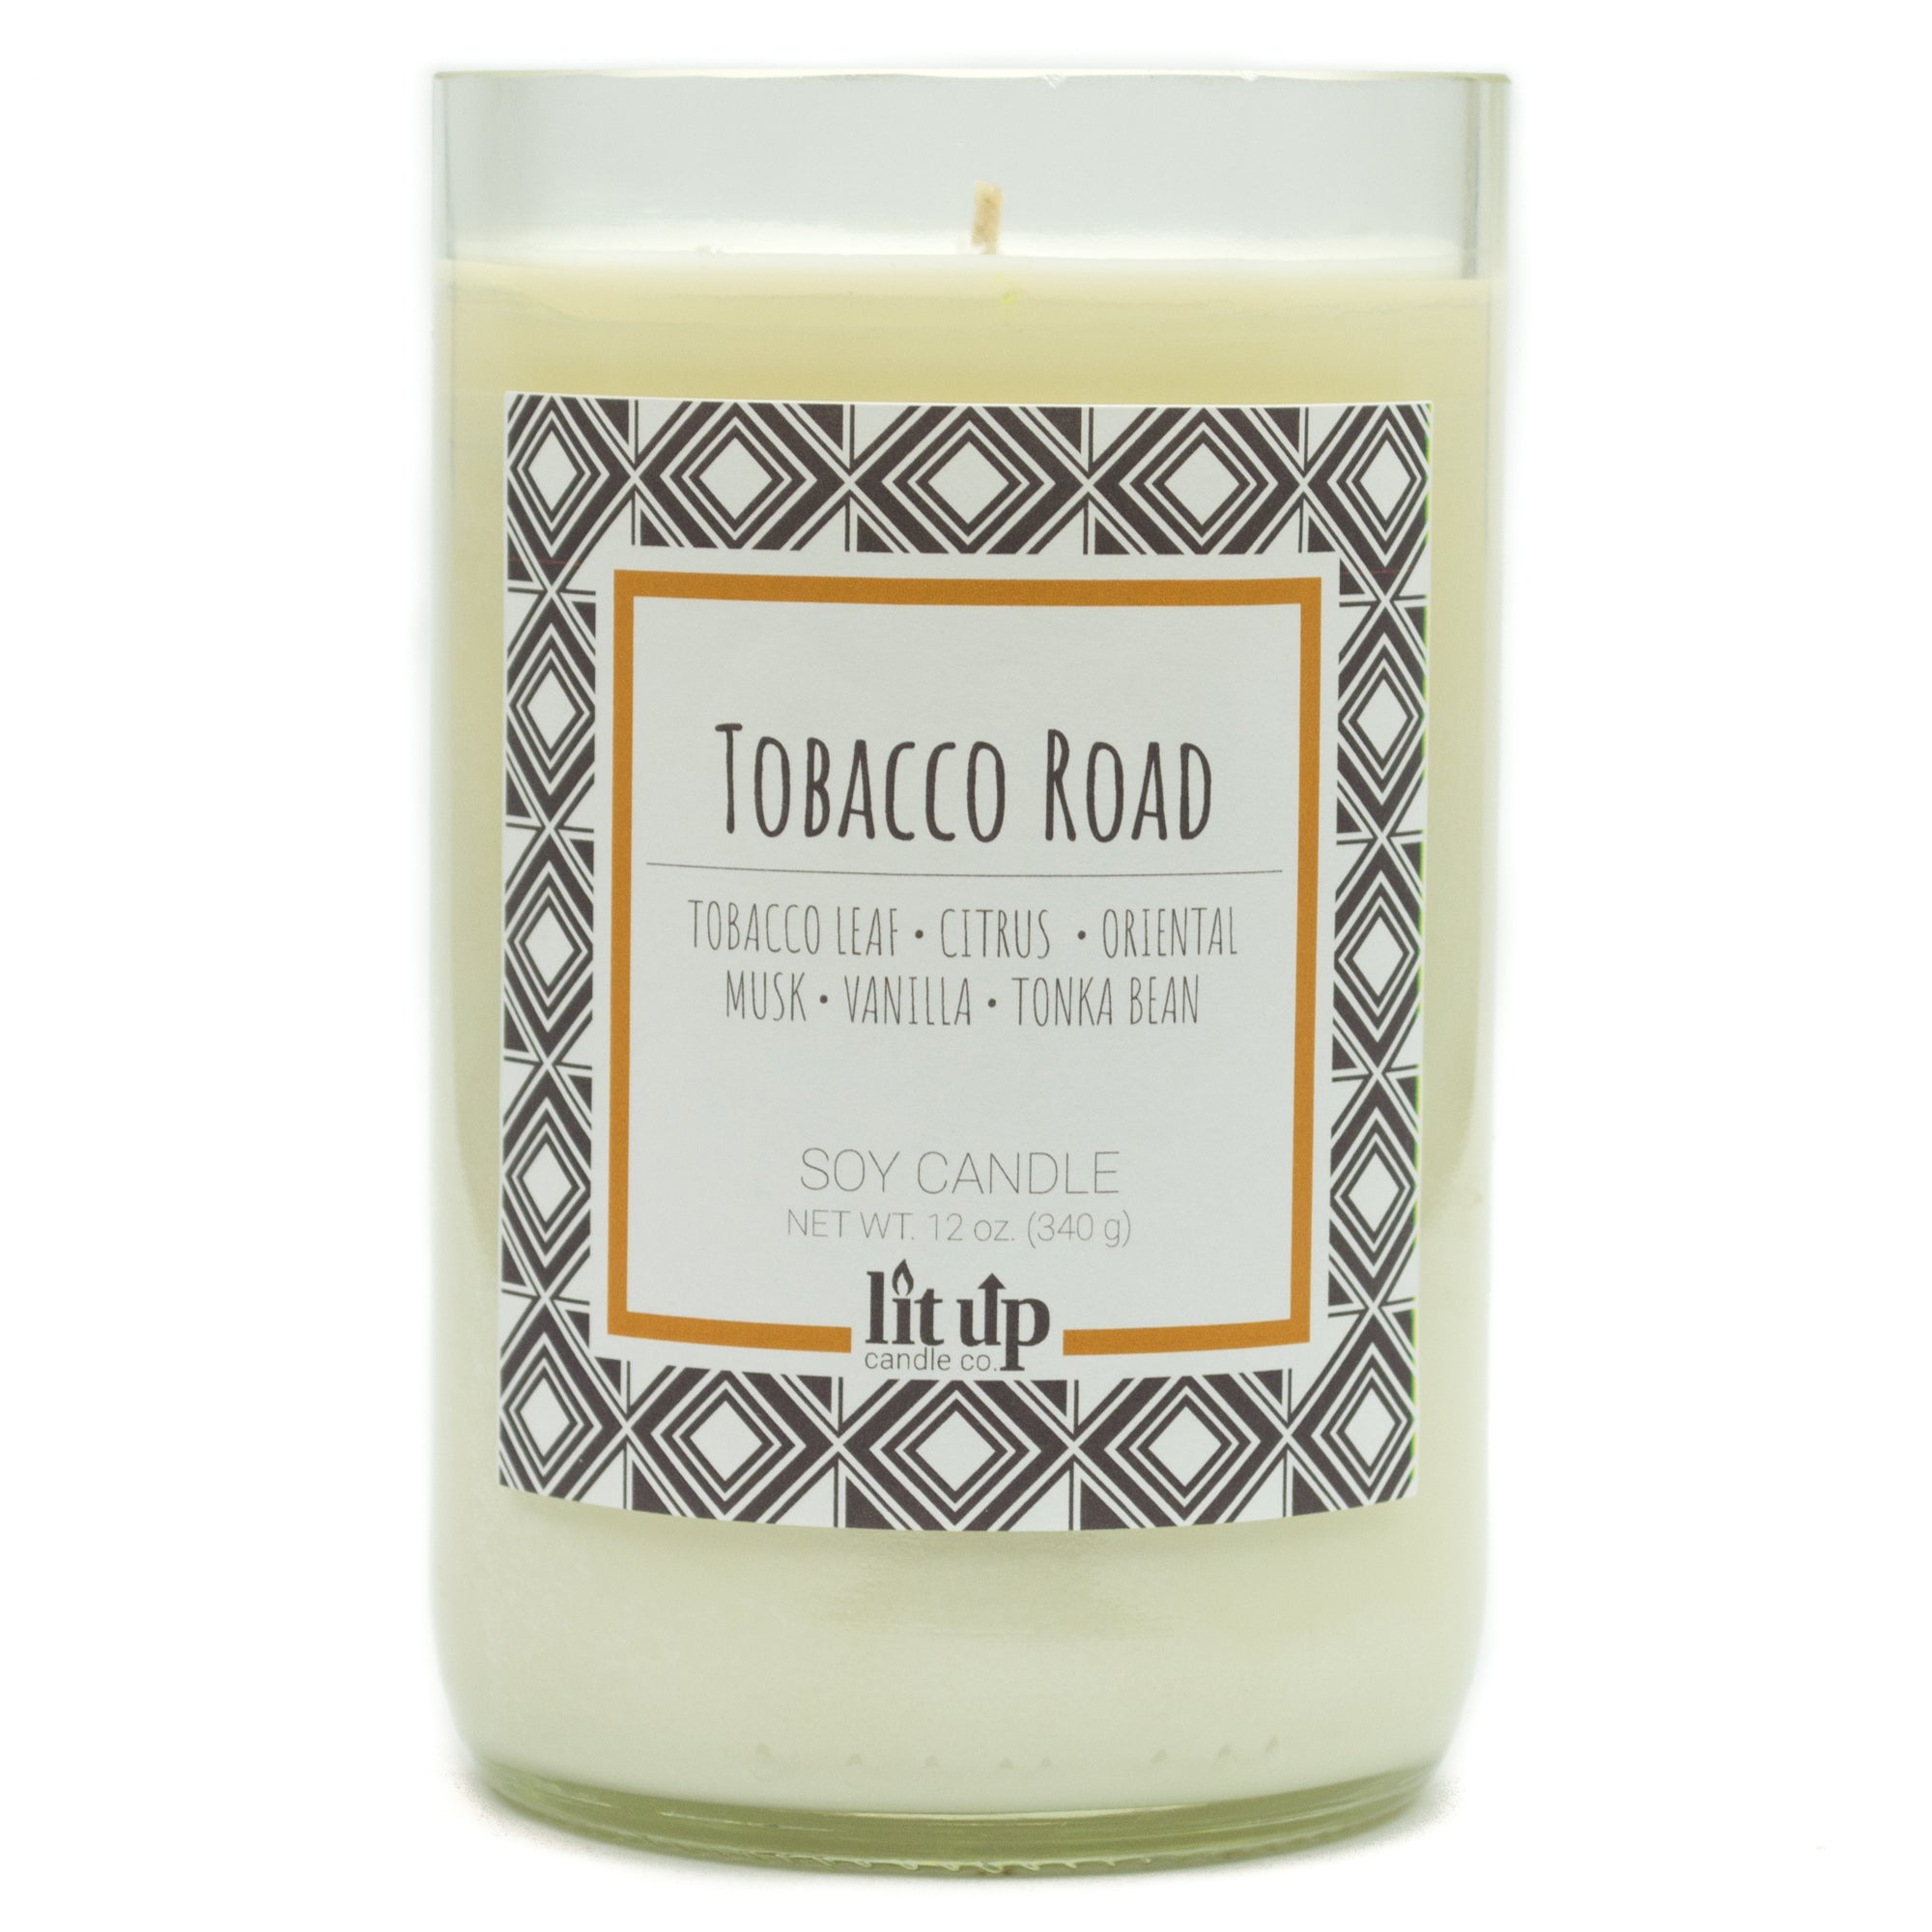 Tobacco Road scented 12 oz. soy candle in upcycled wine bottle - FKA Tobacco Caramel